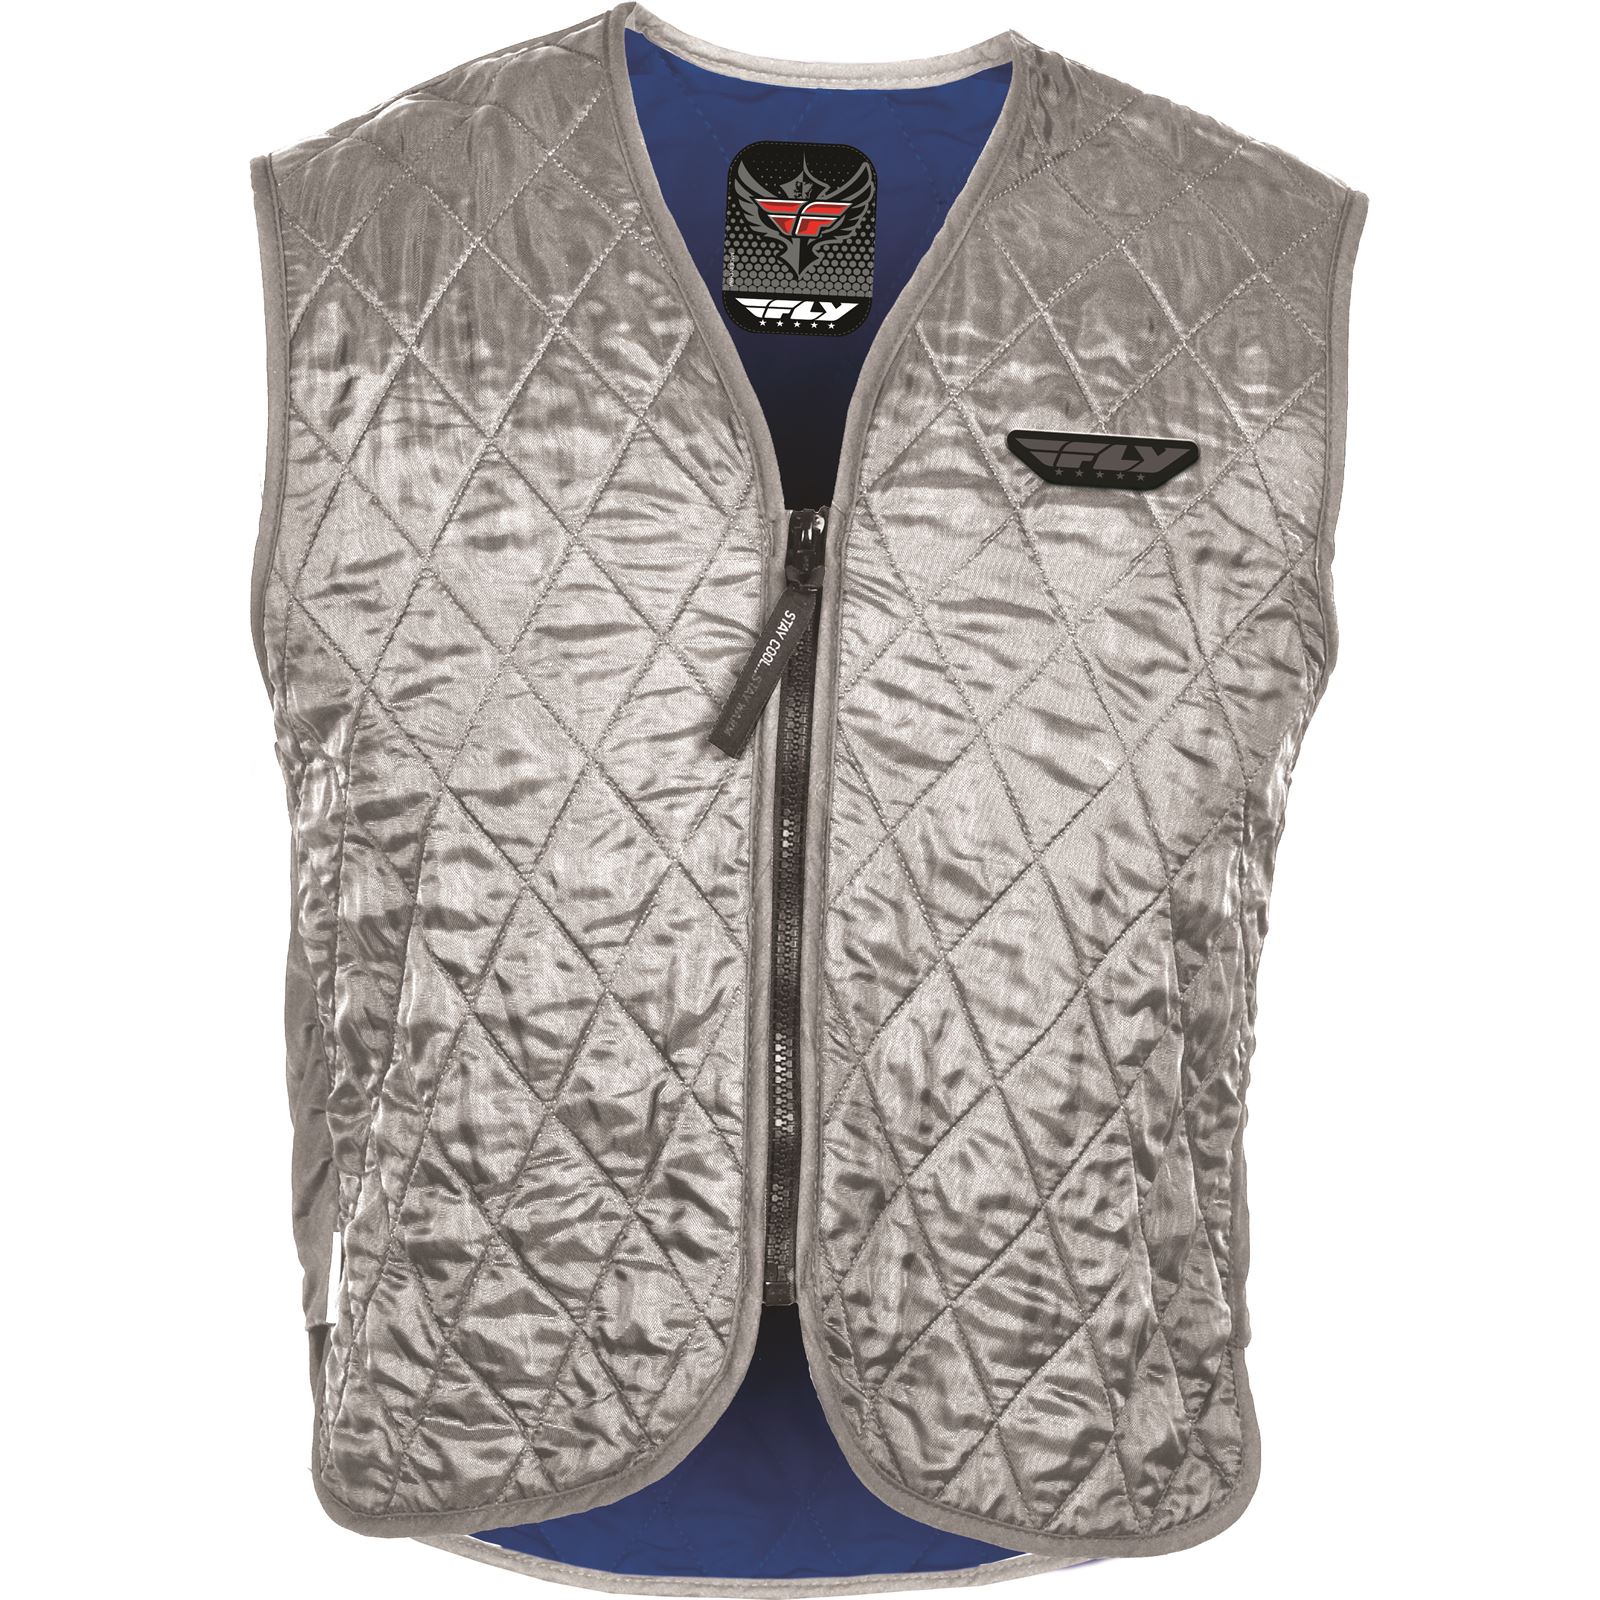 Fly Racing Cooling Vest